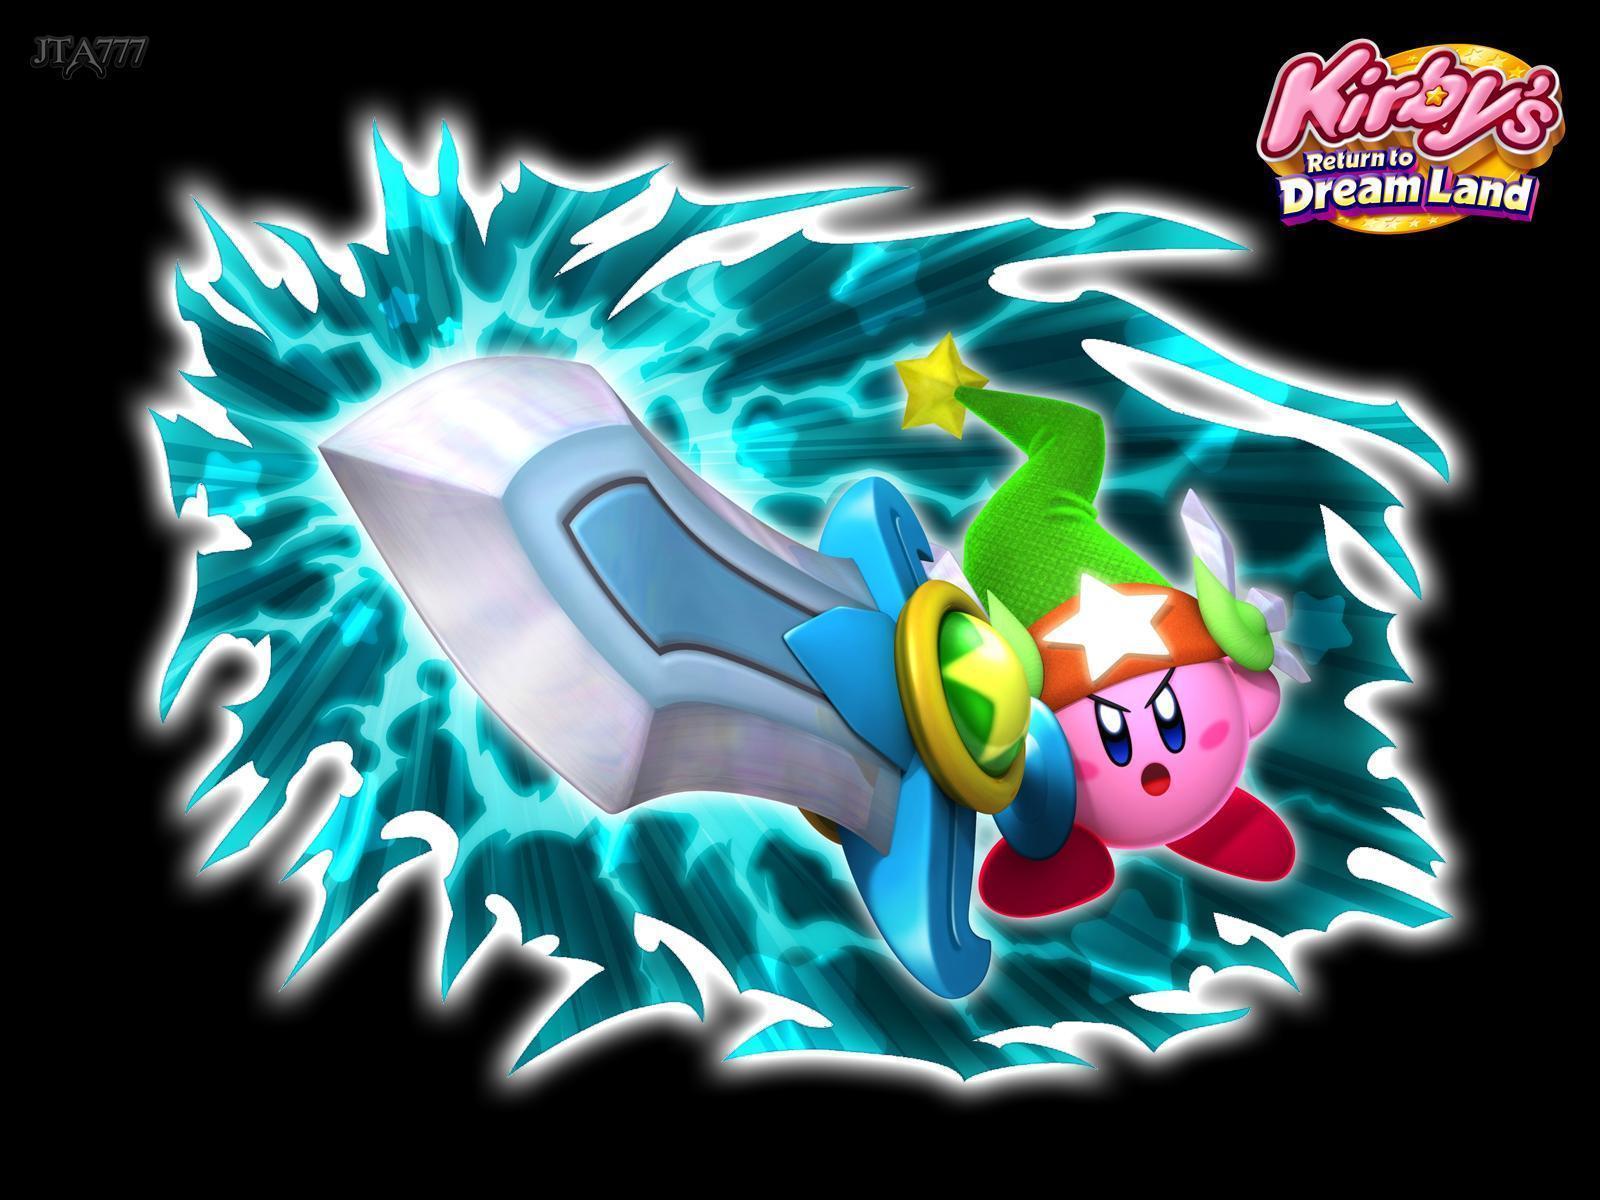 New Kirby Return to Dreamland Wallpaper!! 2 different sizes